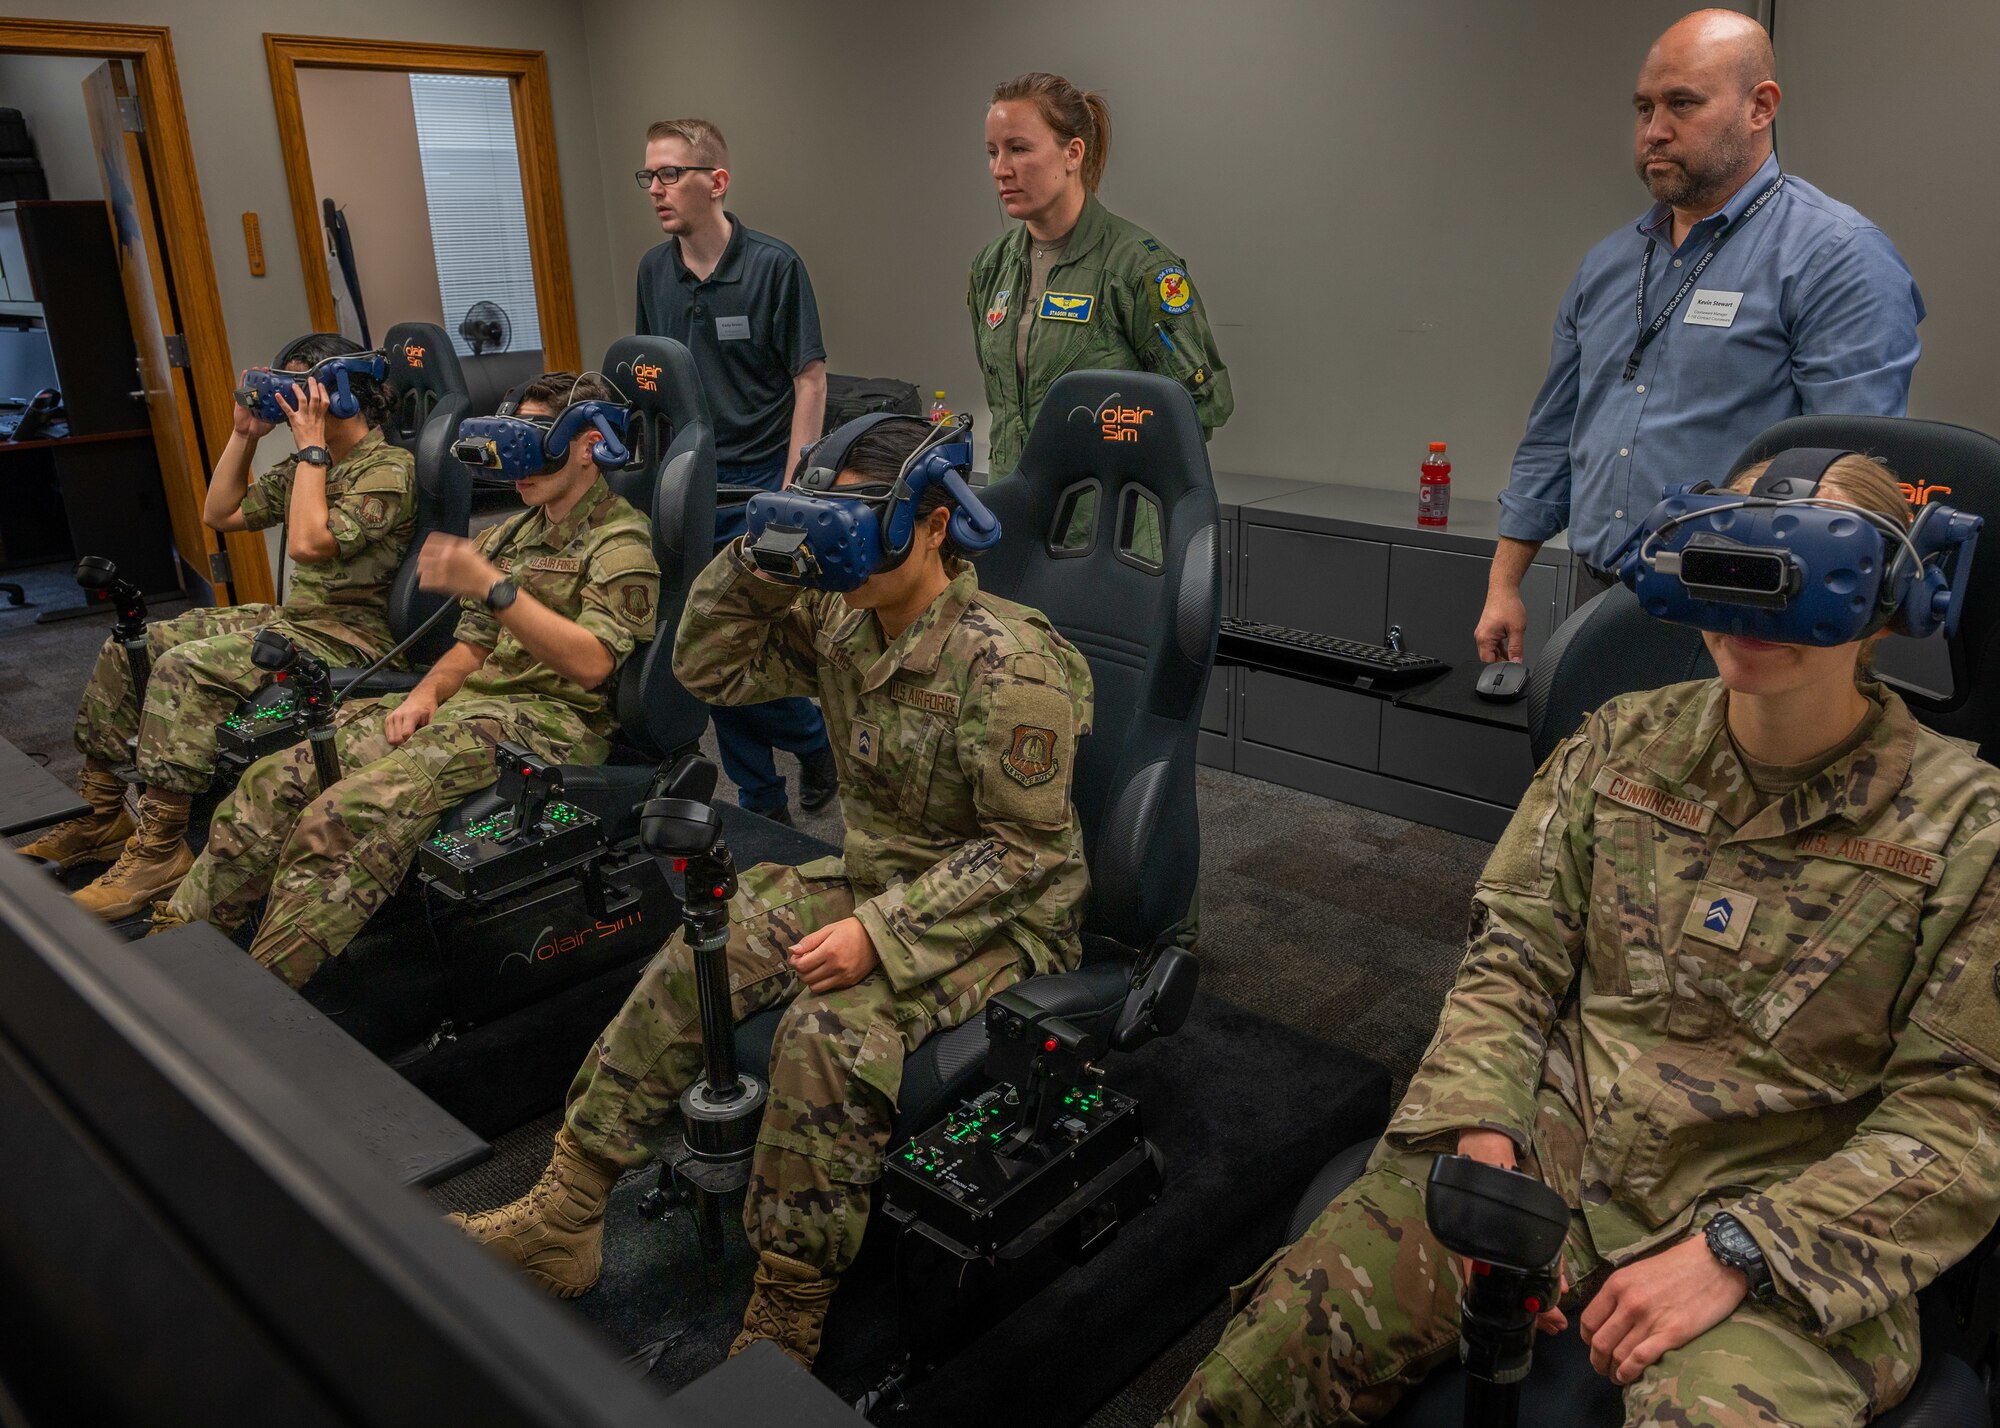 Air Force ROTC Academy Cadets prepare to learn how to fly F-15E Strike Eagles in a virtual reality training simulation at Seymour Johnson Air Force Base, North Carolina, August 3, 2023. This was part of a week-long tour aimed to enhance the cadets’ knowledge of Air Force career fields and a closer look at the base’s mission. (U.S. Air Force photo by Airman 1st Class Leighton Lucero)